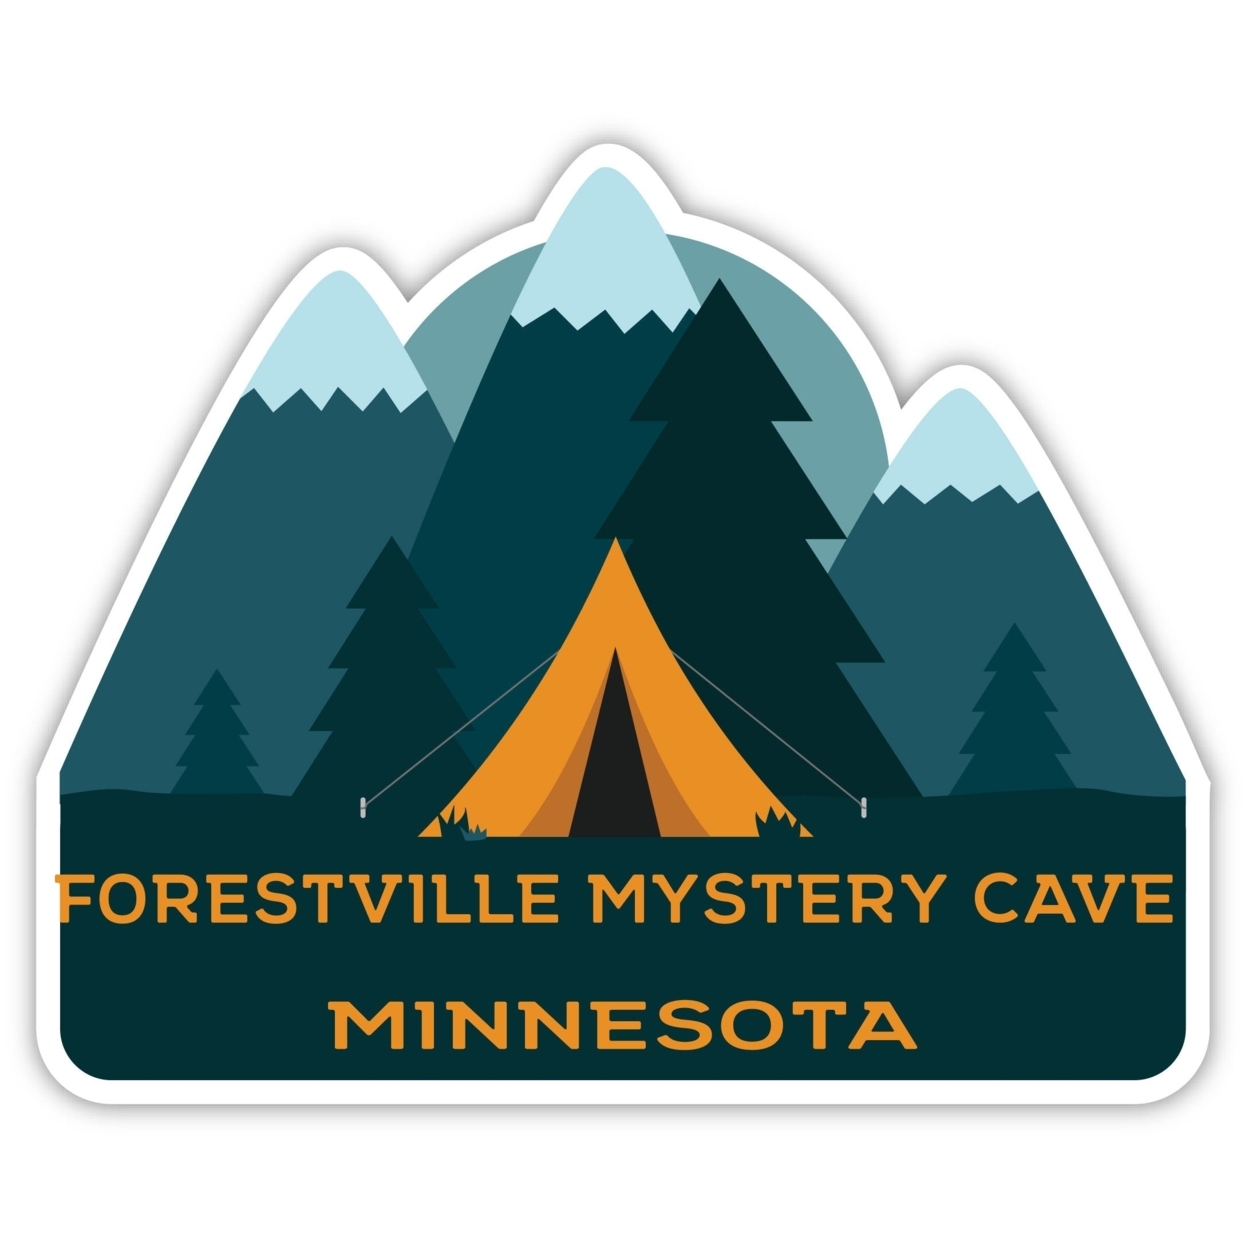 Forestville Mystery Cave Minnesota Souvenir Decorative Stickers (Choose Theme And Size) - 4-Pack, 6-Inch, Tent